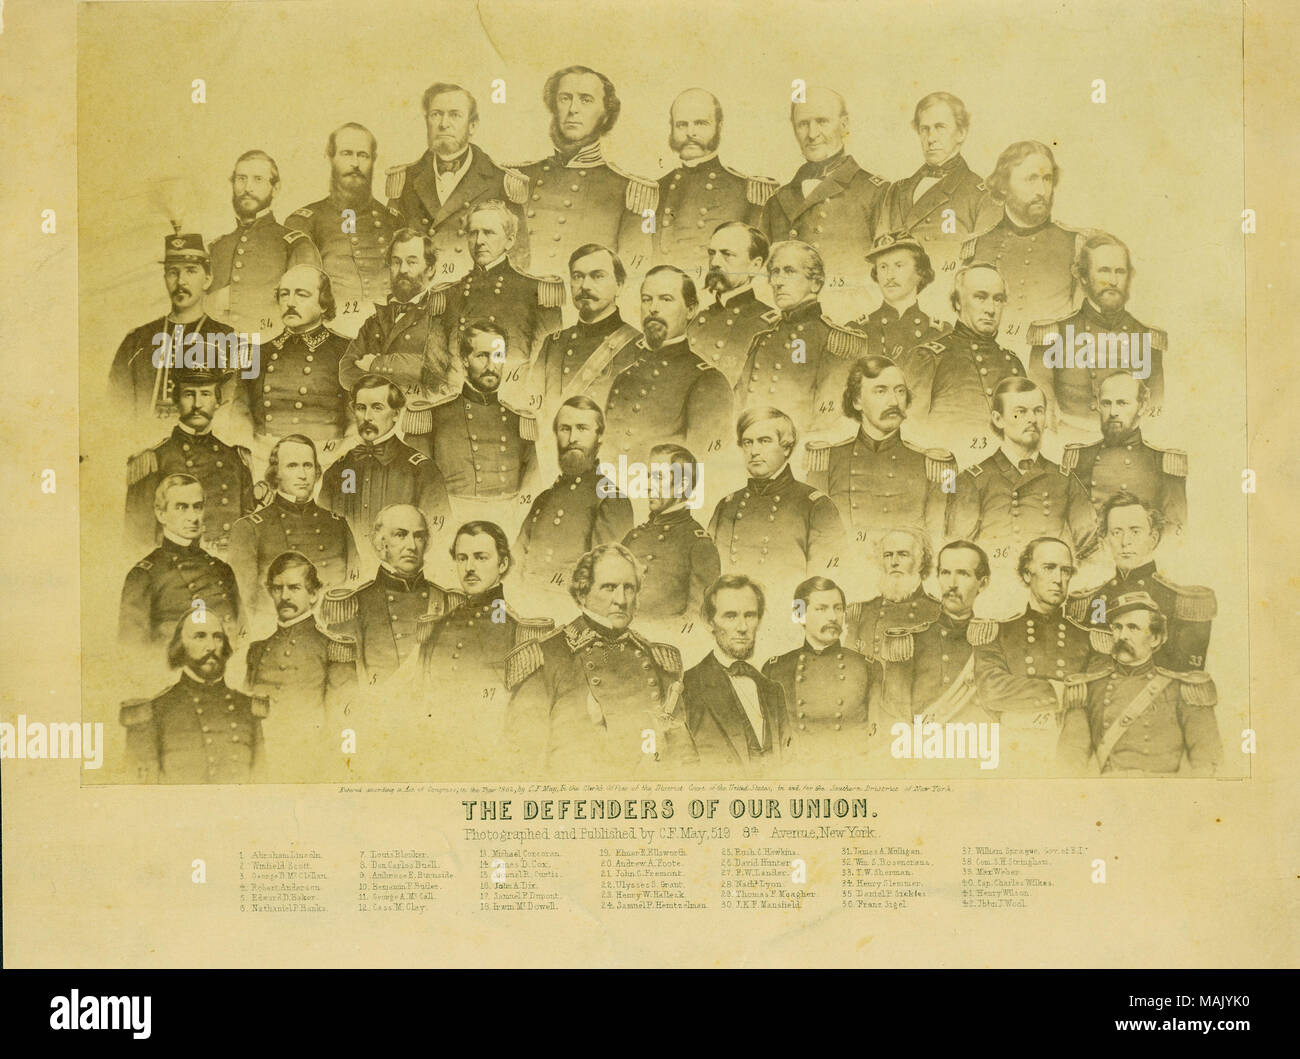 Bust portraits of 42 Union officers and government officials. Images are numbered and a list of names below the image corresponds with the individual portraits. 'THE DEFENDERS OF OUR UNION.' (printed below image). Title: 'The Defenders of Our Union.'  . 1862. C.F. May, New York Stock Photo